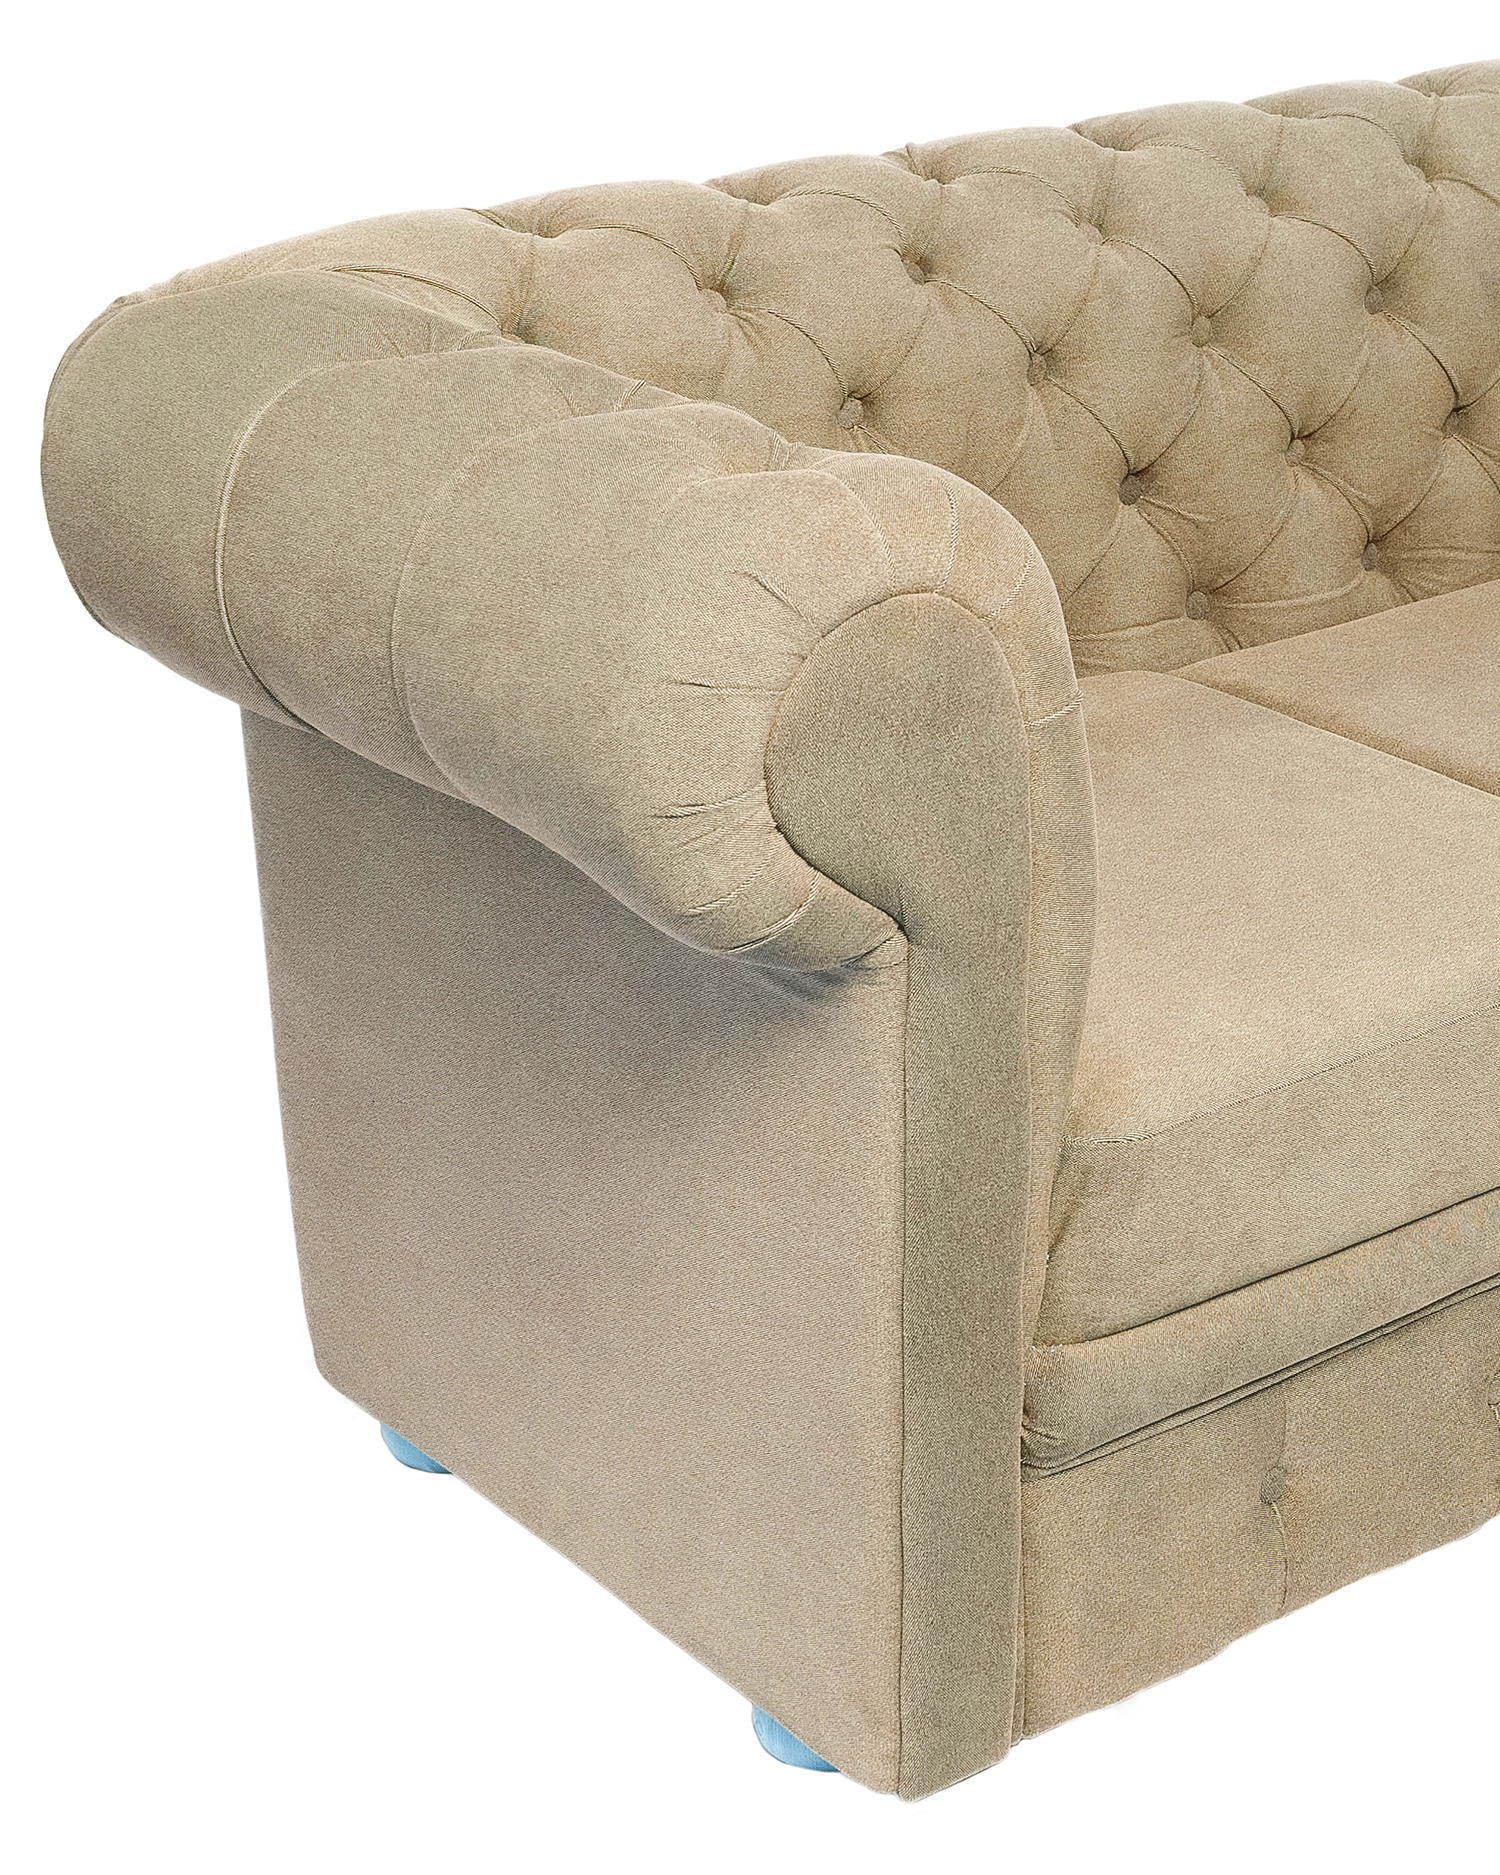 Demo product furniture vintage sofa beige discounted free shipping